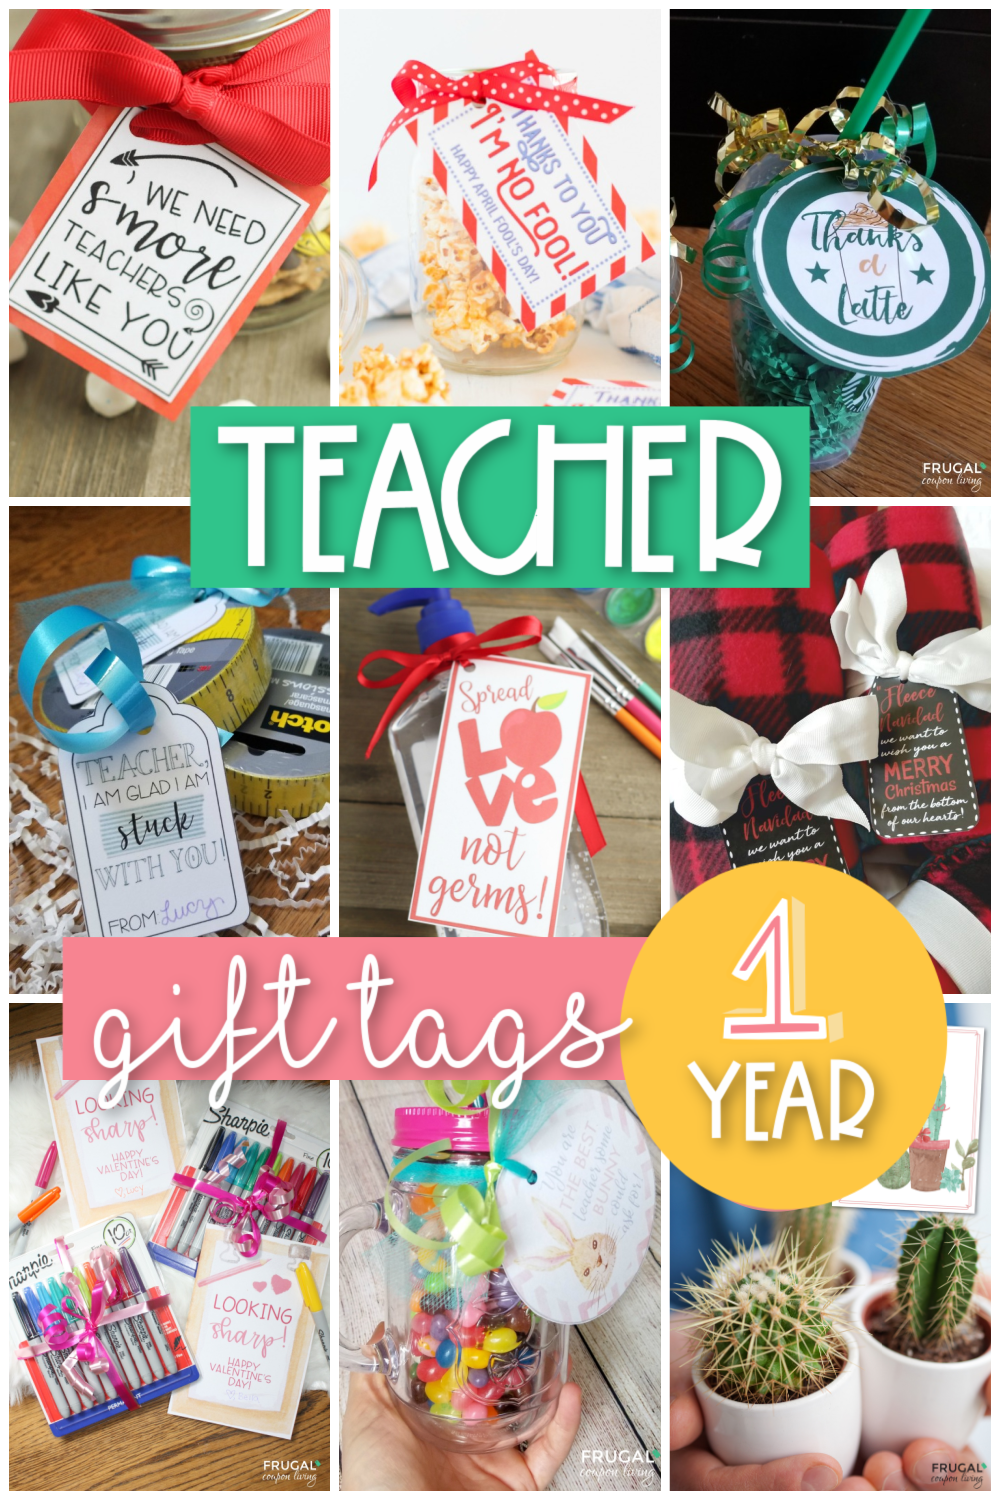 Teacher Tags to Add to Teacher Gifts – The Oaks Apparel Co.